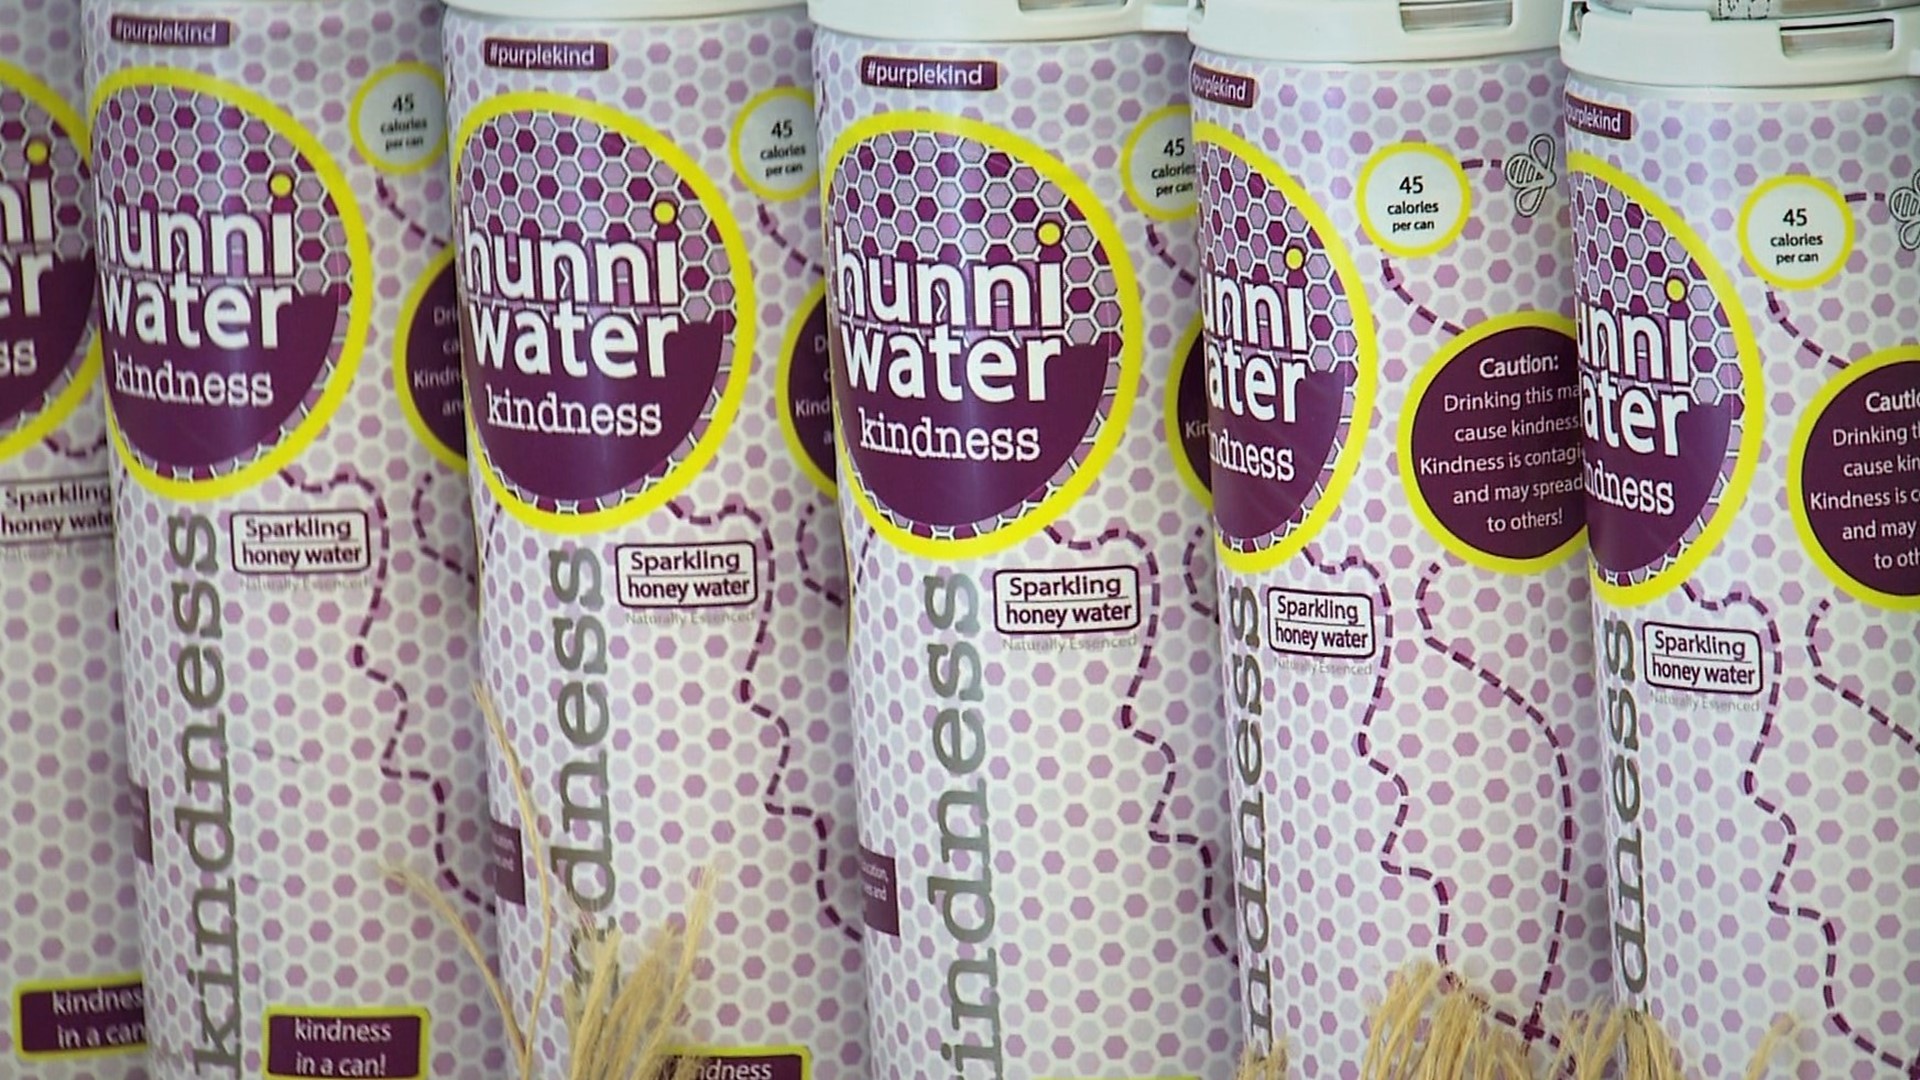 Hunniwater Kindness is a soda alternative and a portion of sales proceeds are donated to non-profits.